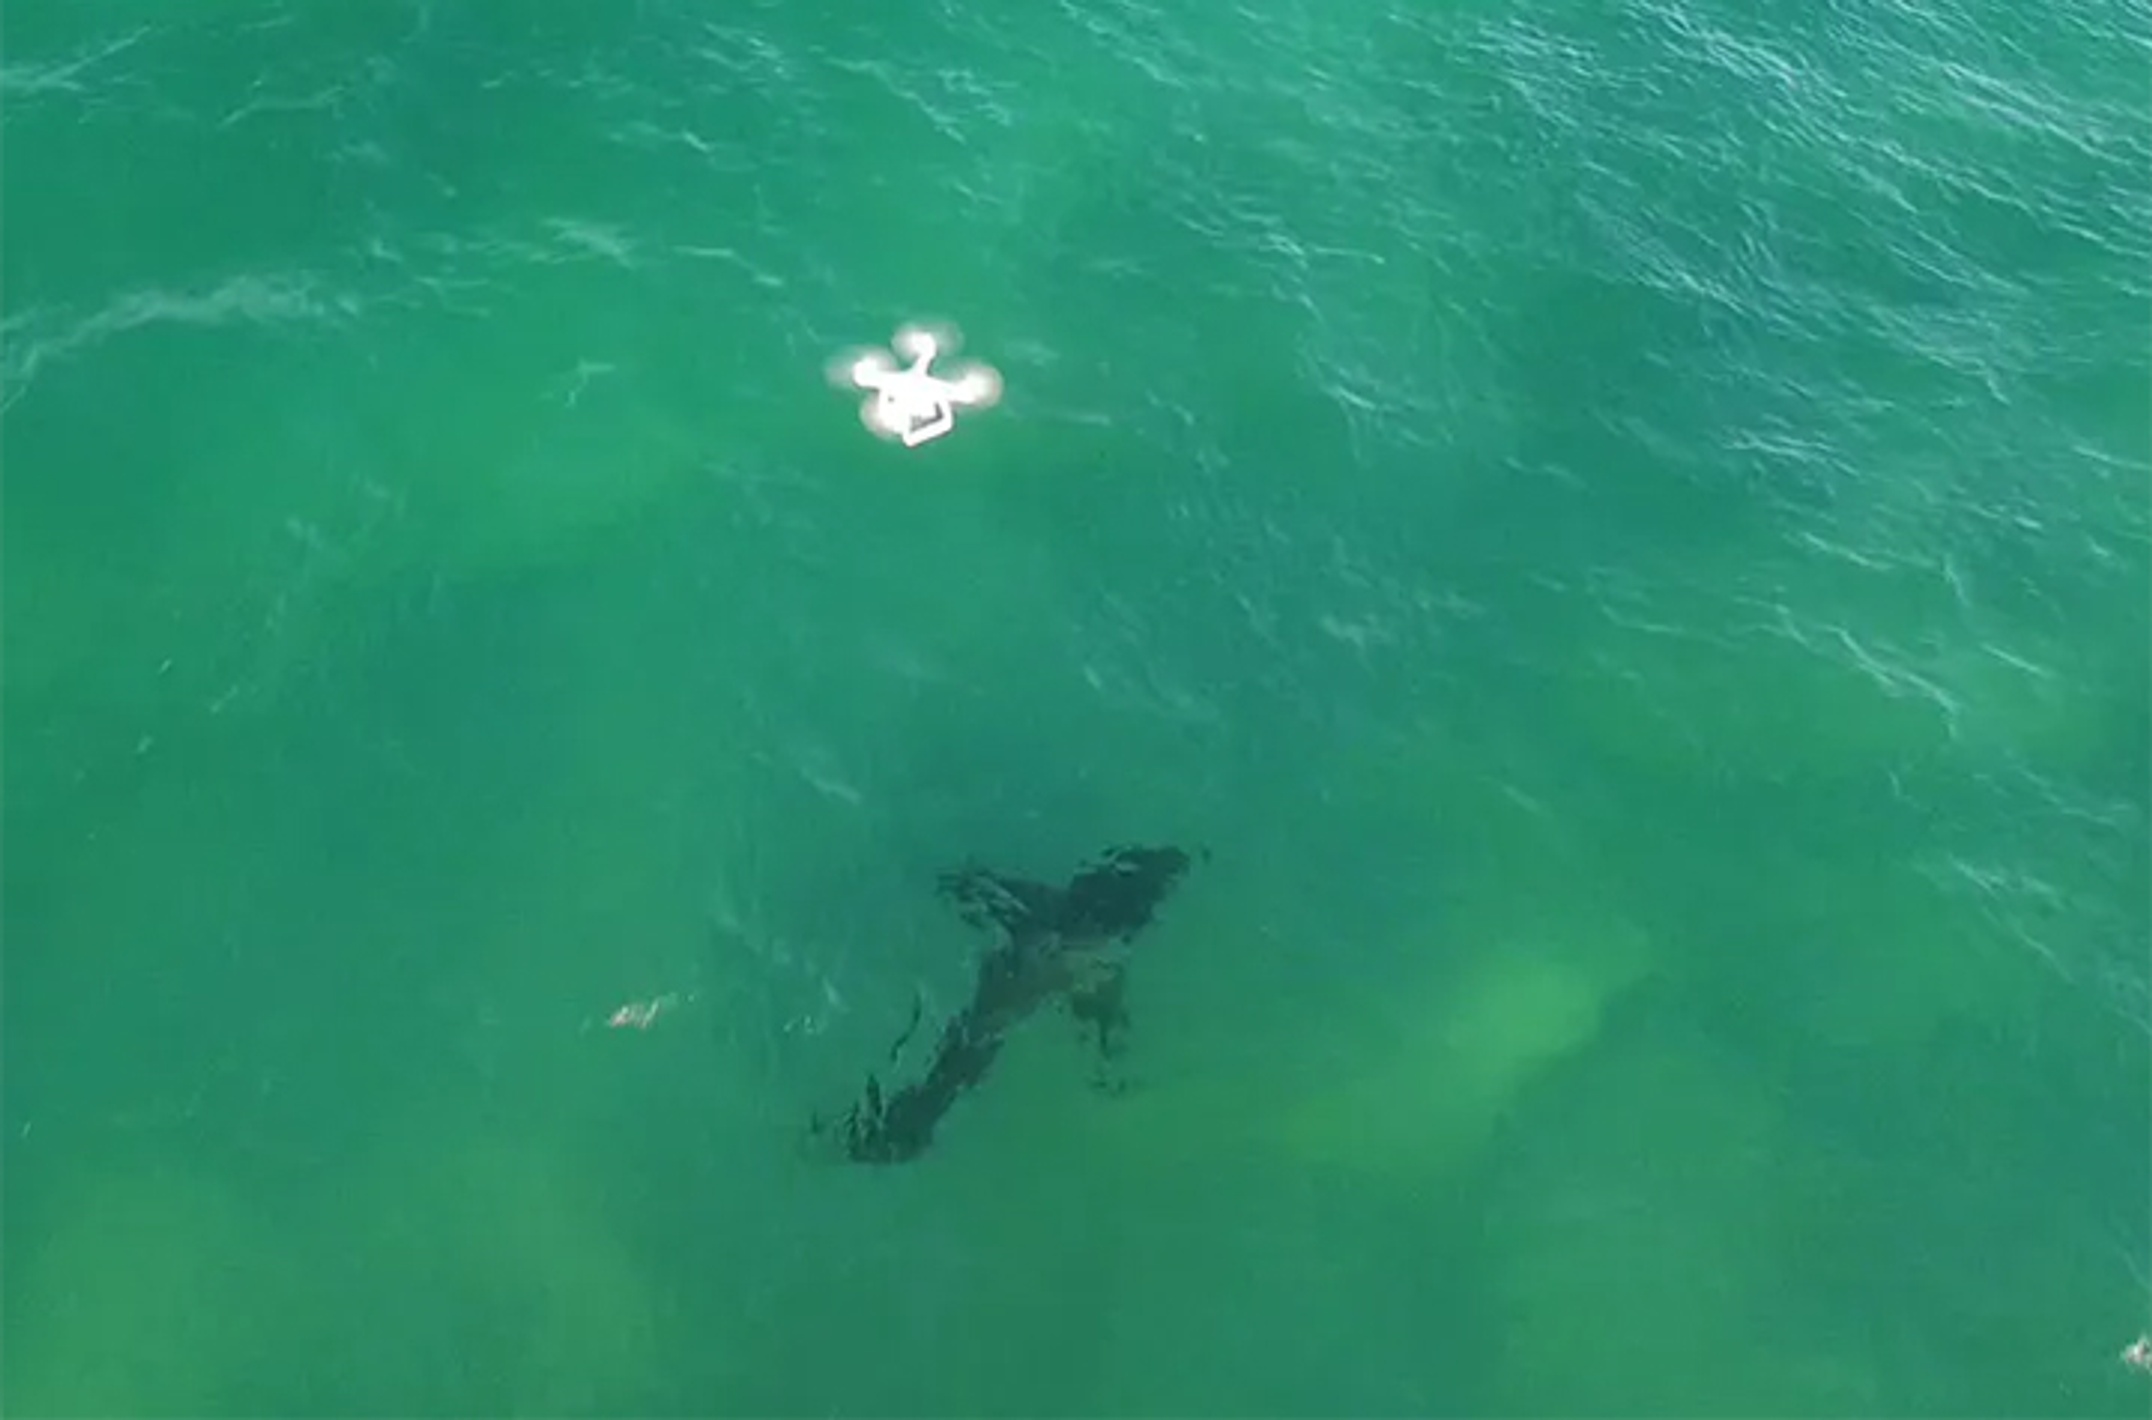 Drone and shark below surface - photo credit Andrew Colefax